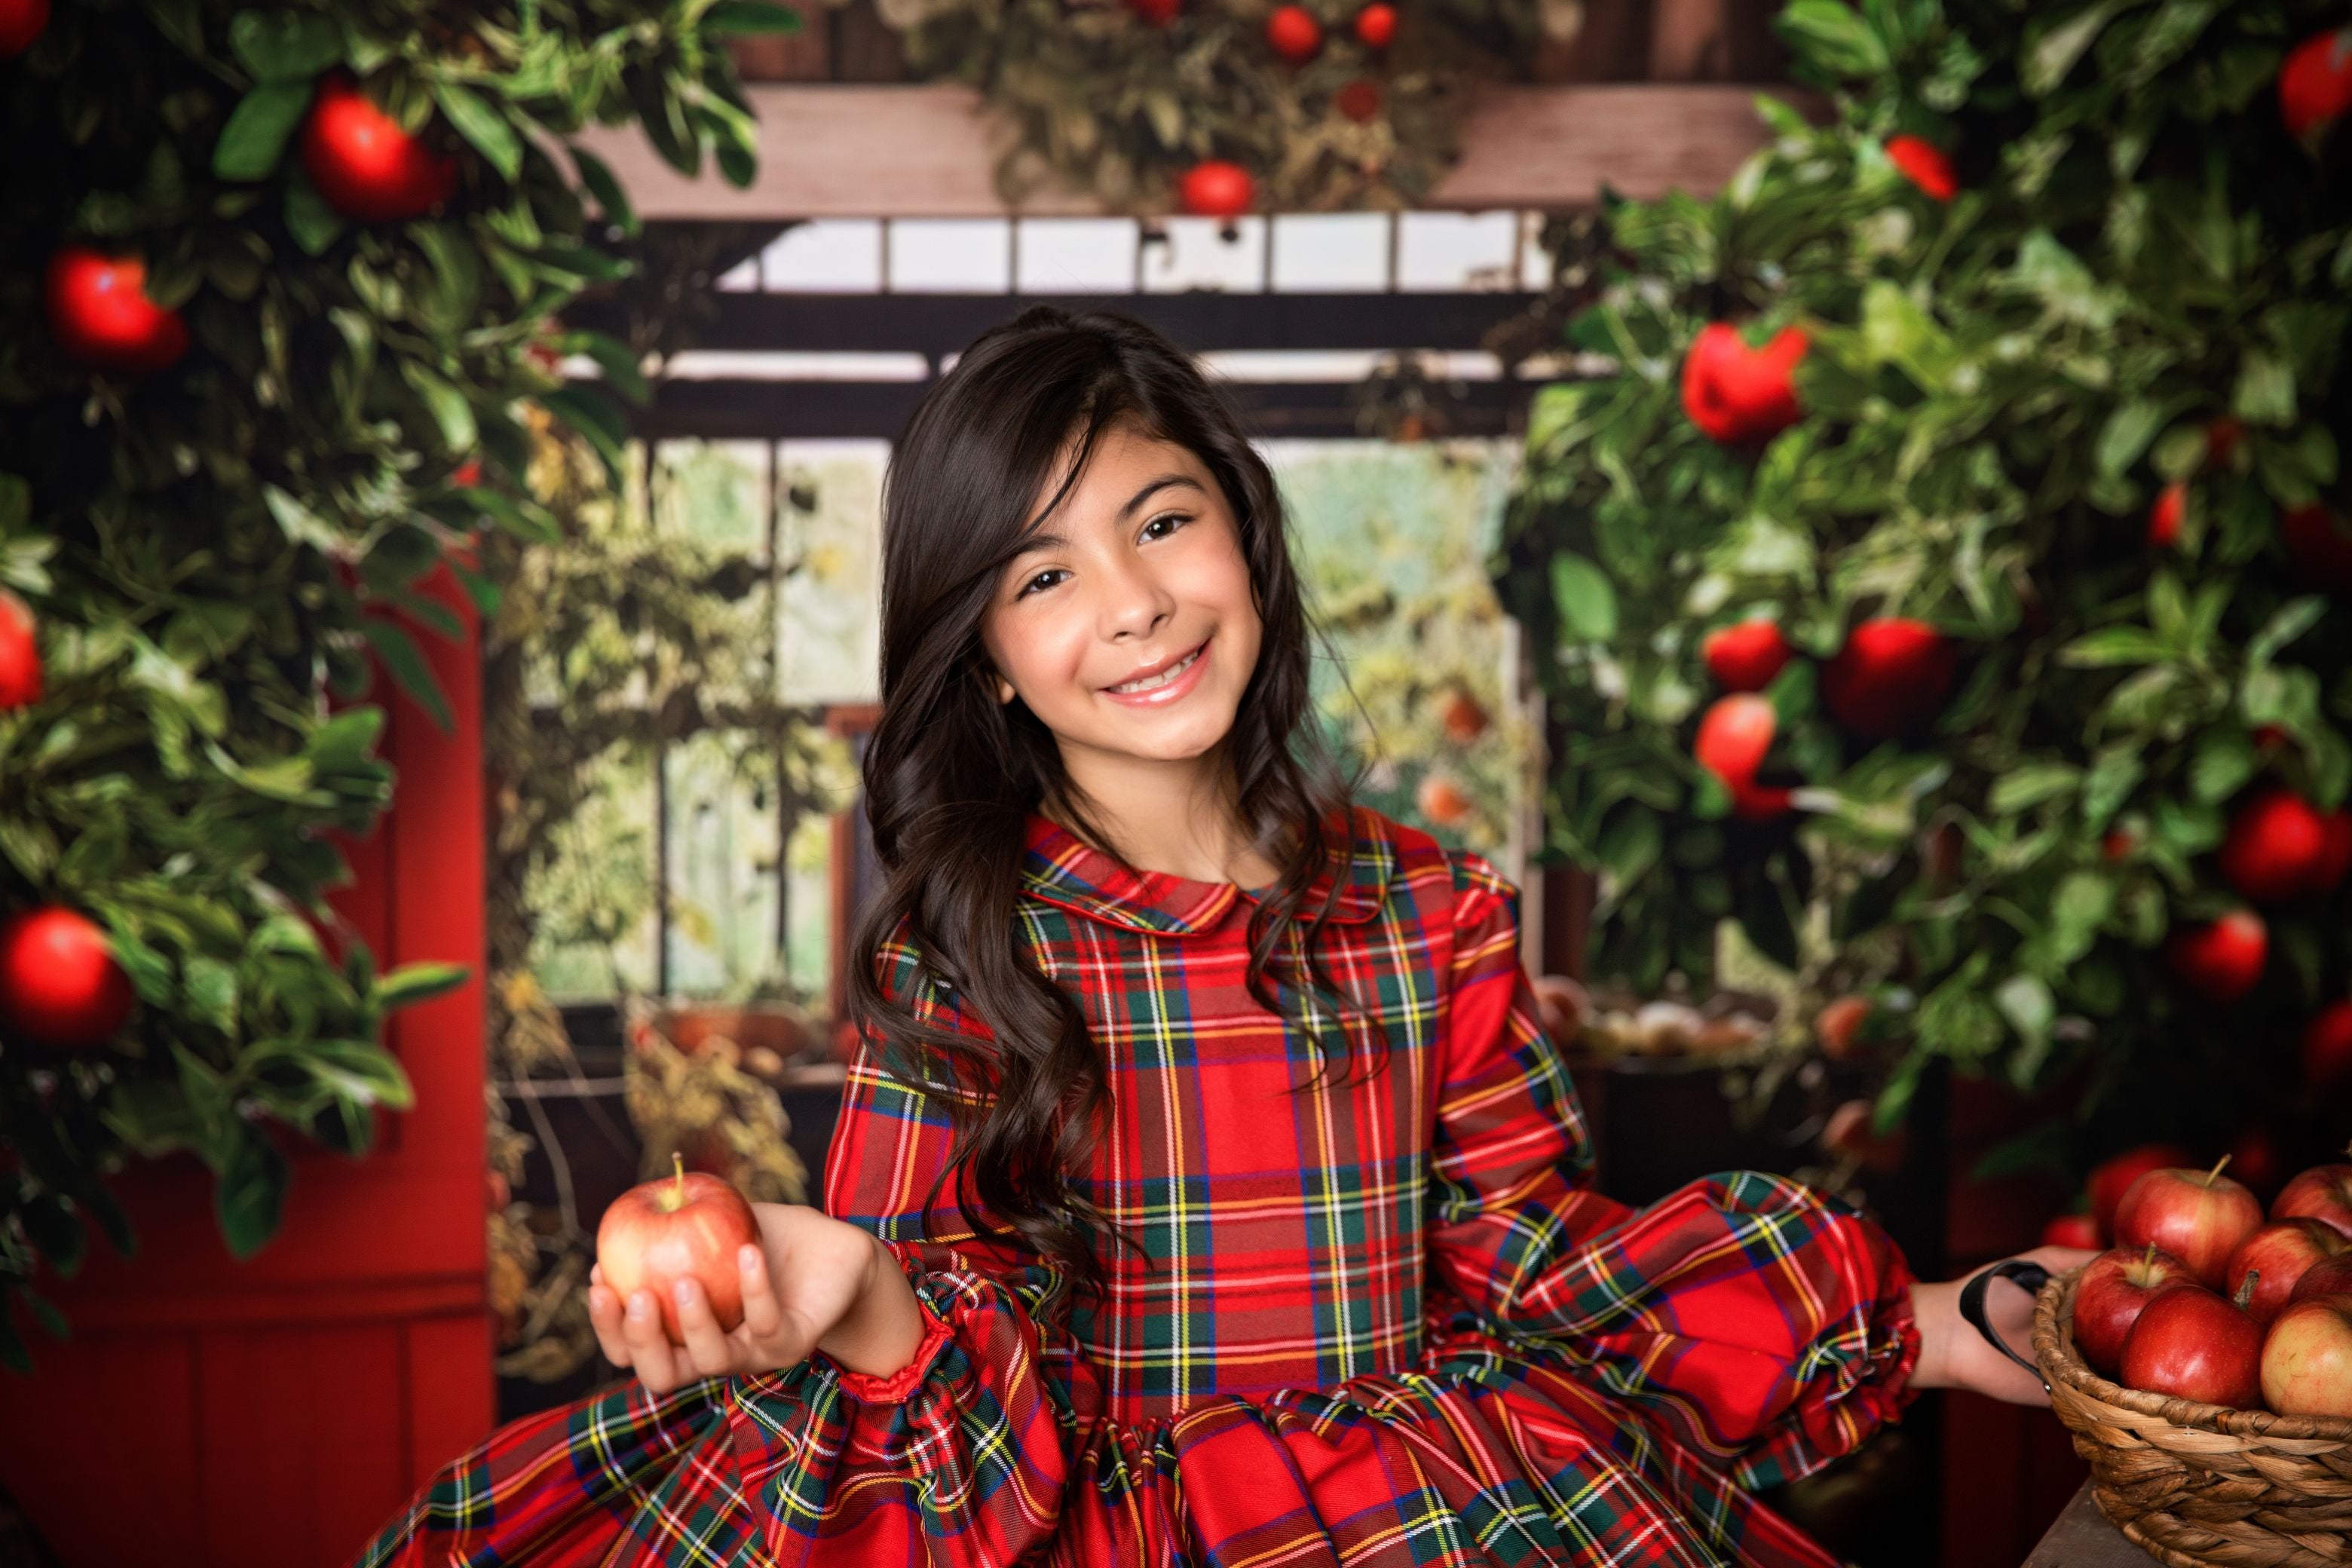 Couture gown rental: "Darling Plaid" Red Vintage Dress Sleeve ( 5 Year - Petite 6 Year)